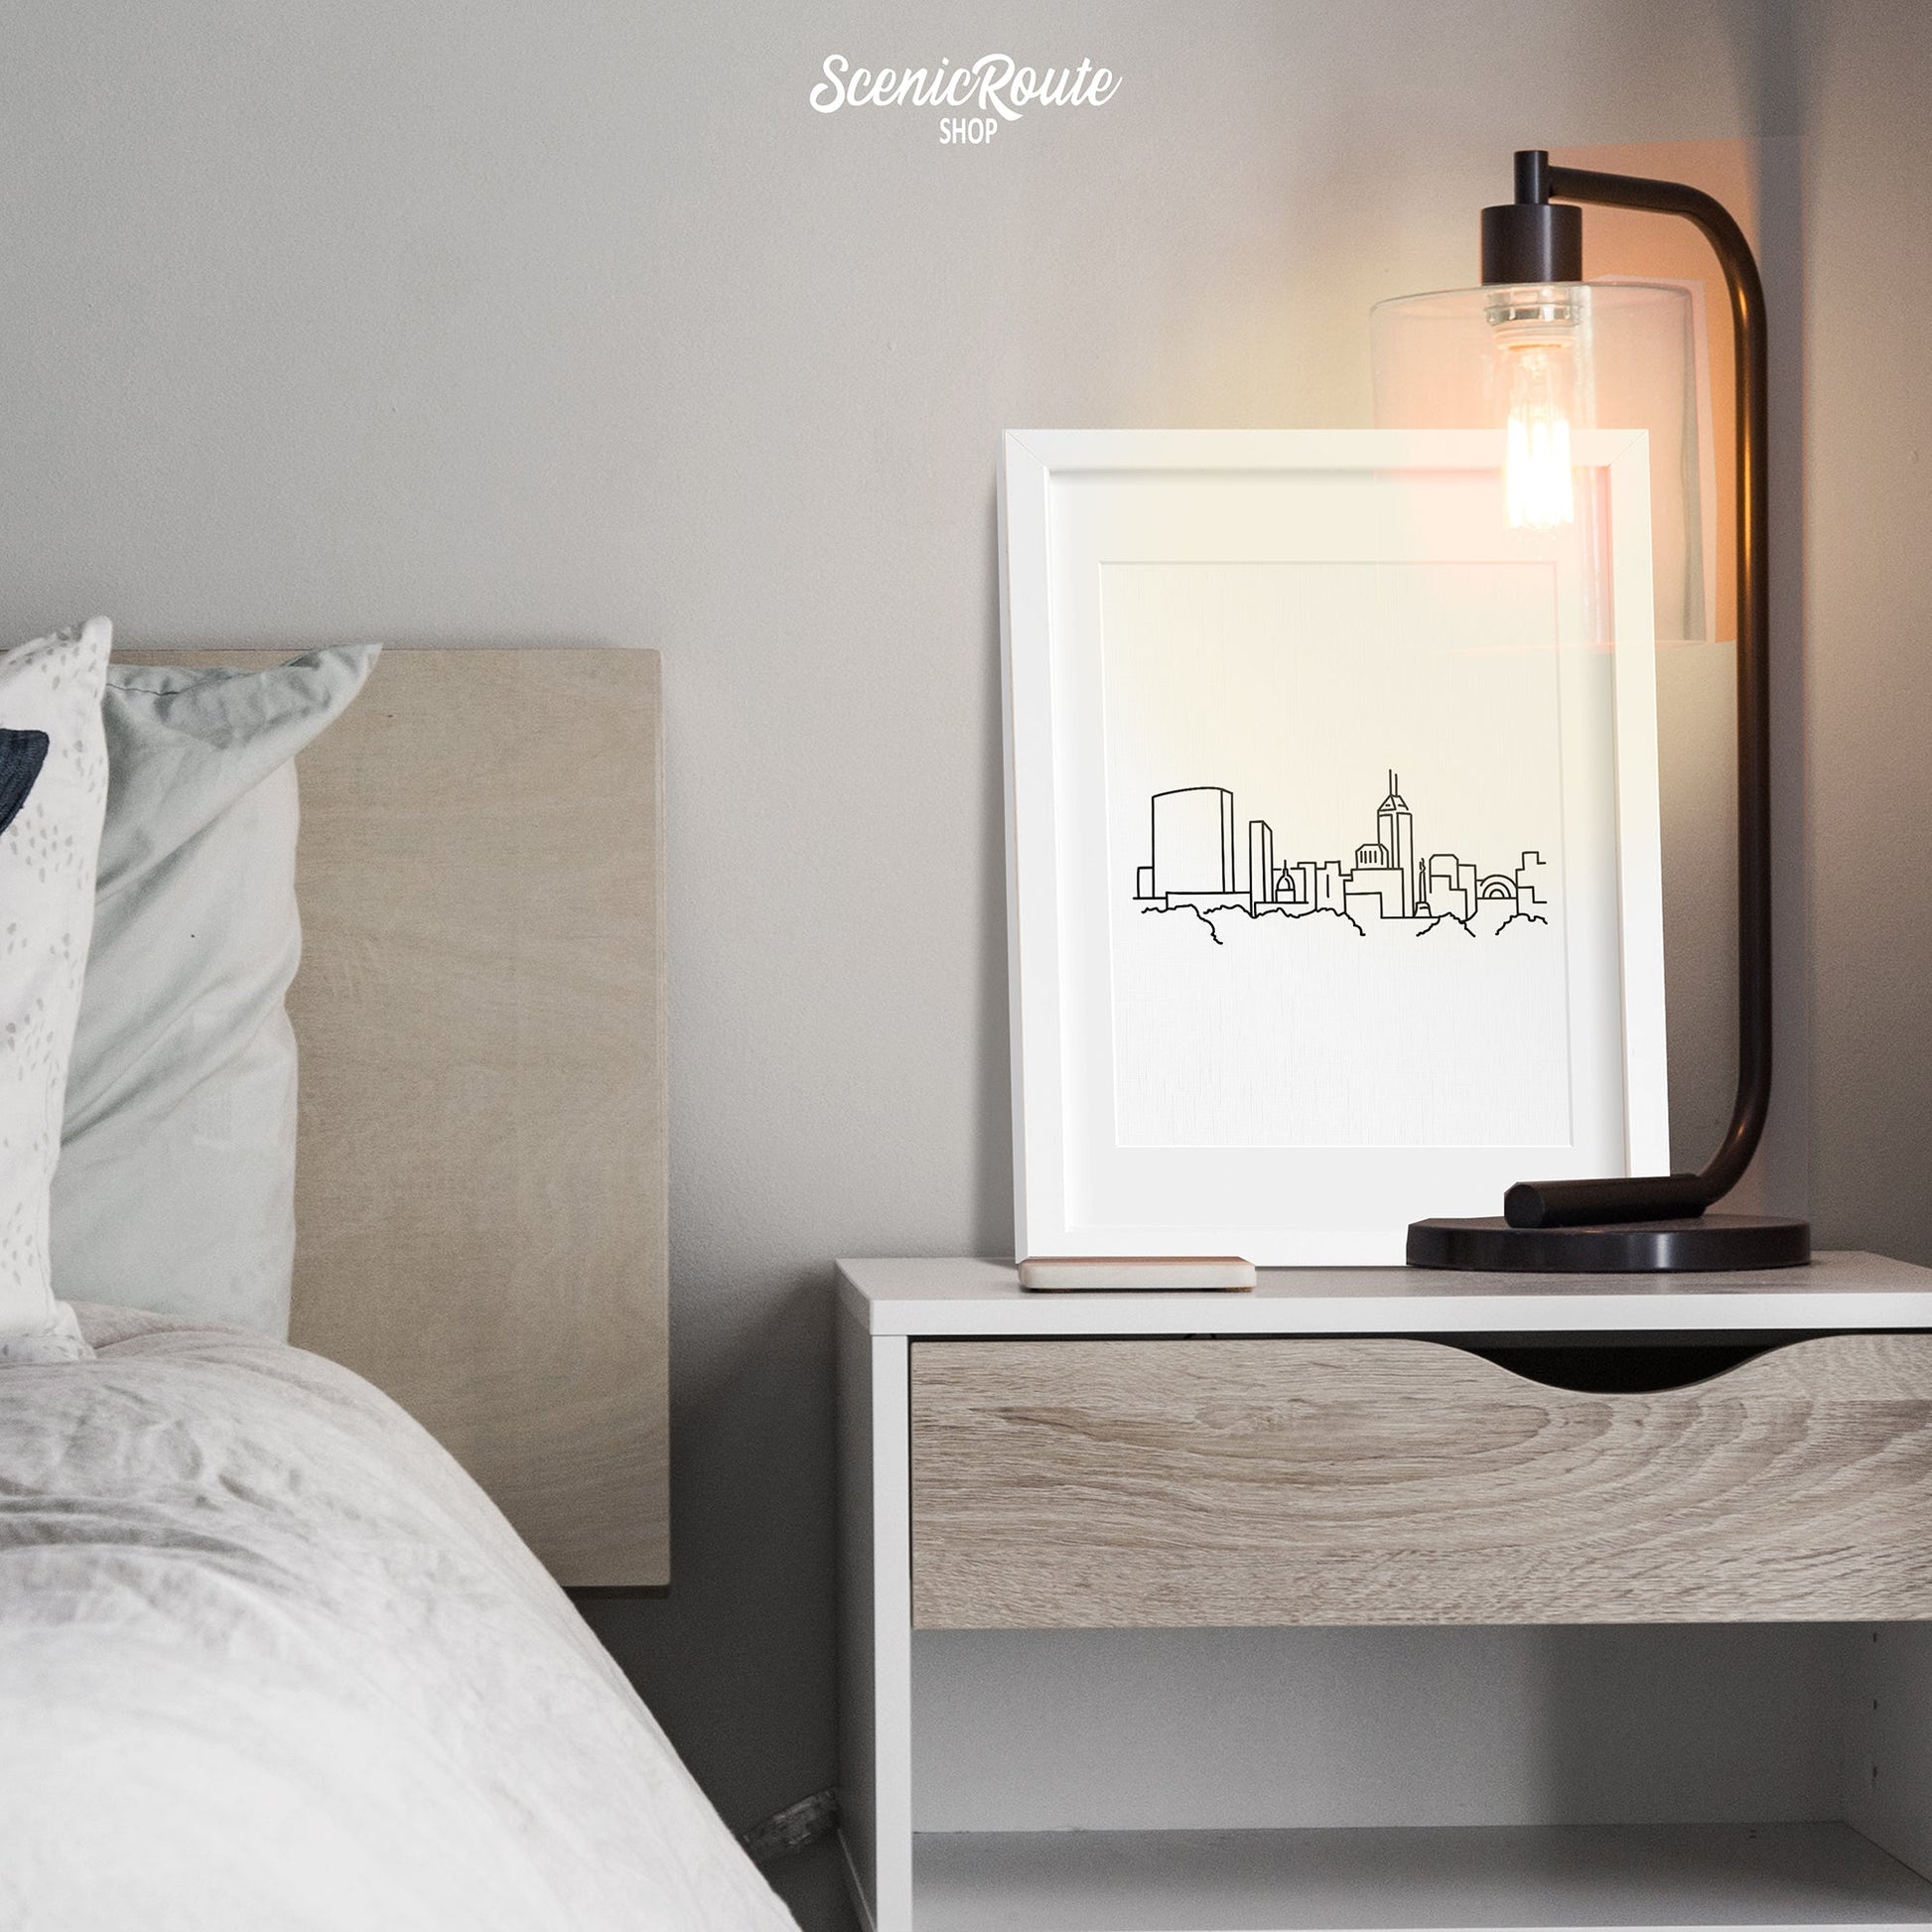 A framed line art drawing of the Indianapolis Skyline above a nightstand next to a bed